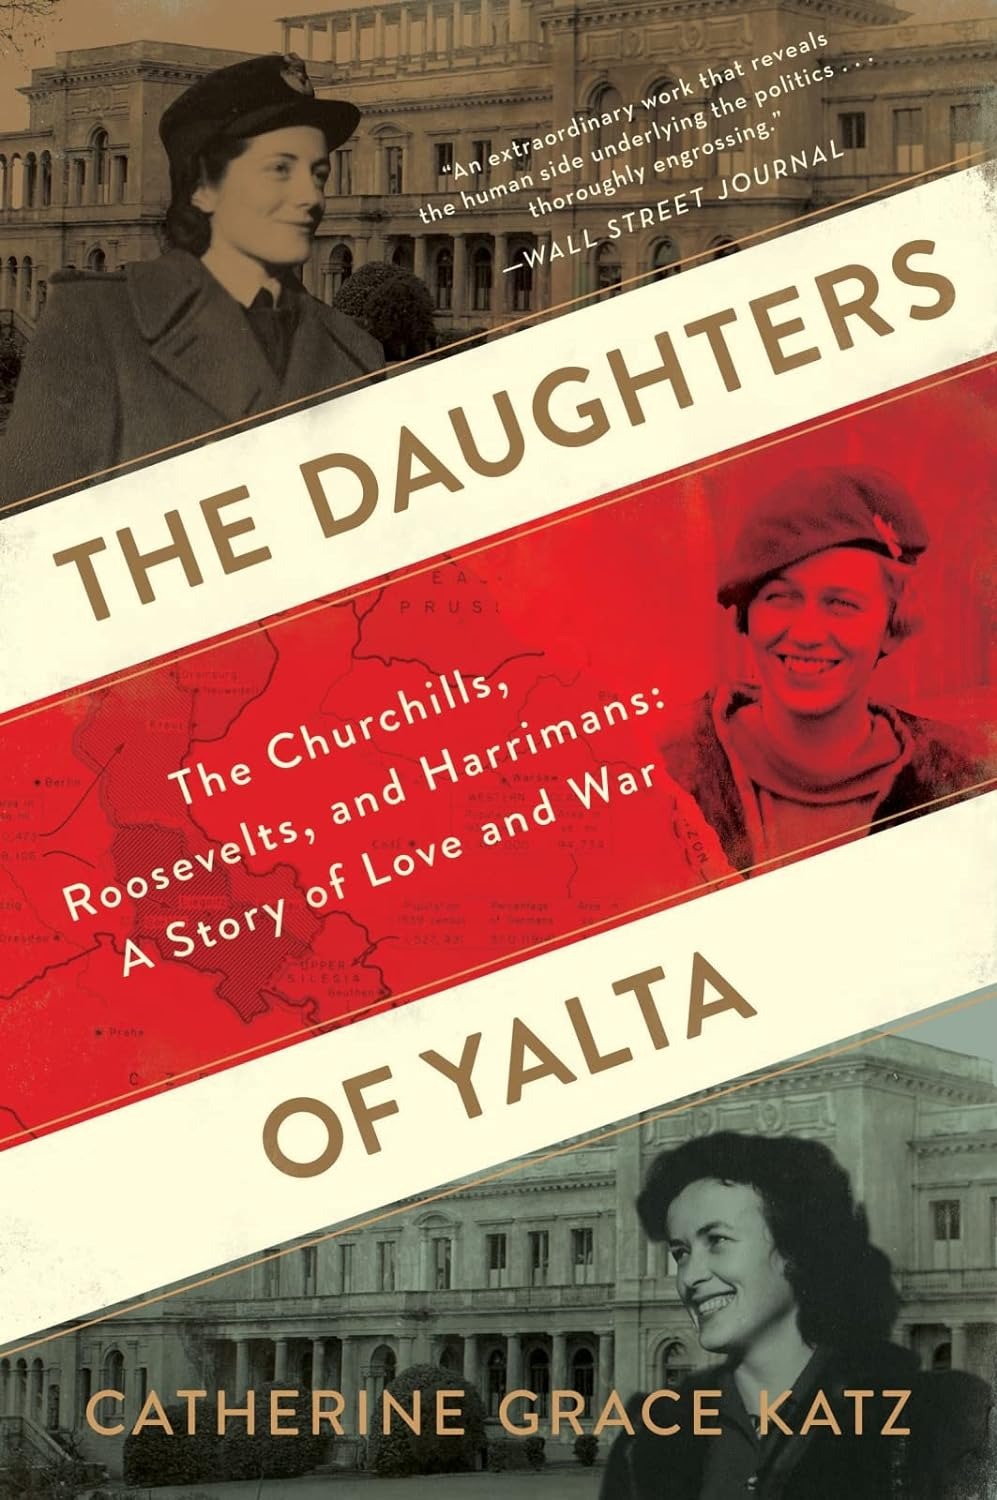 Framingham Reads Together: The Daughters of Yalta book discussion thumbnail Photo